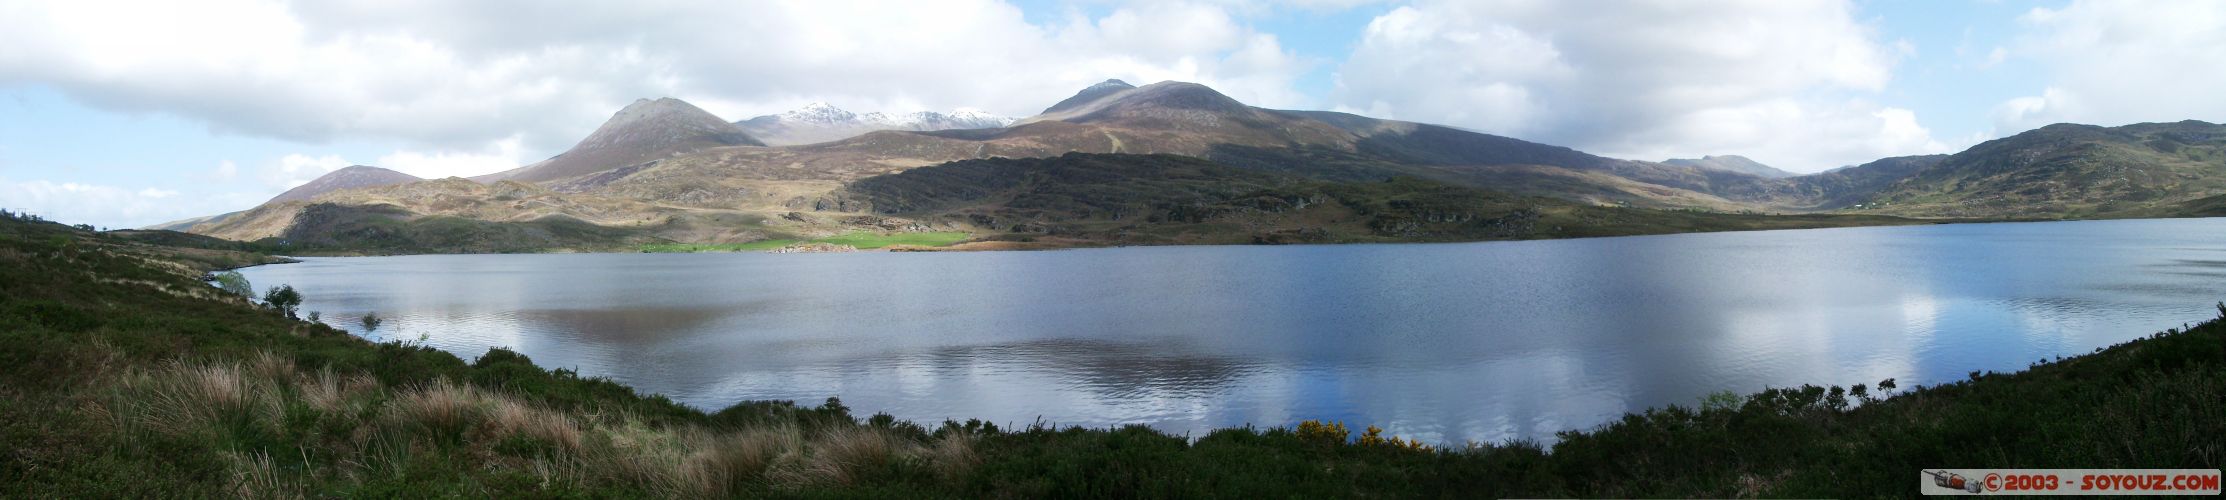 Ring of Kerry - Lough Caragh - Panoramique
